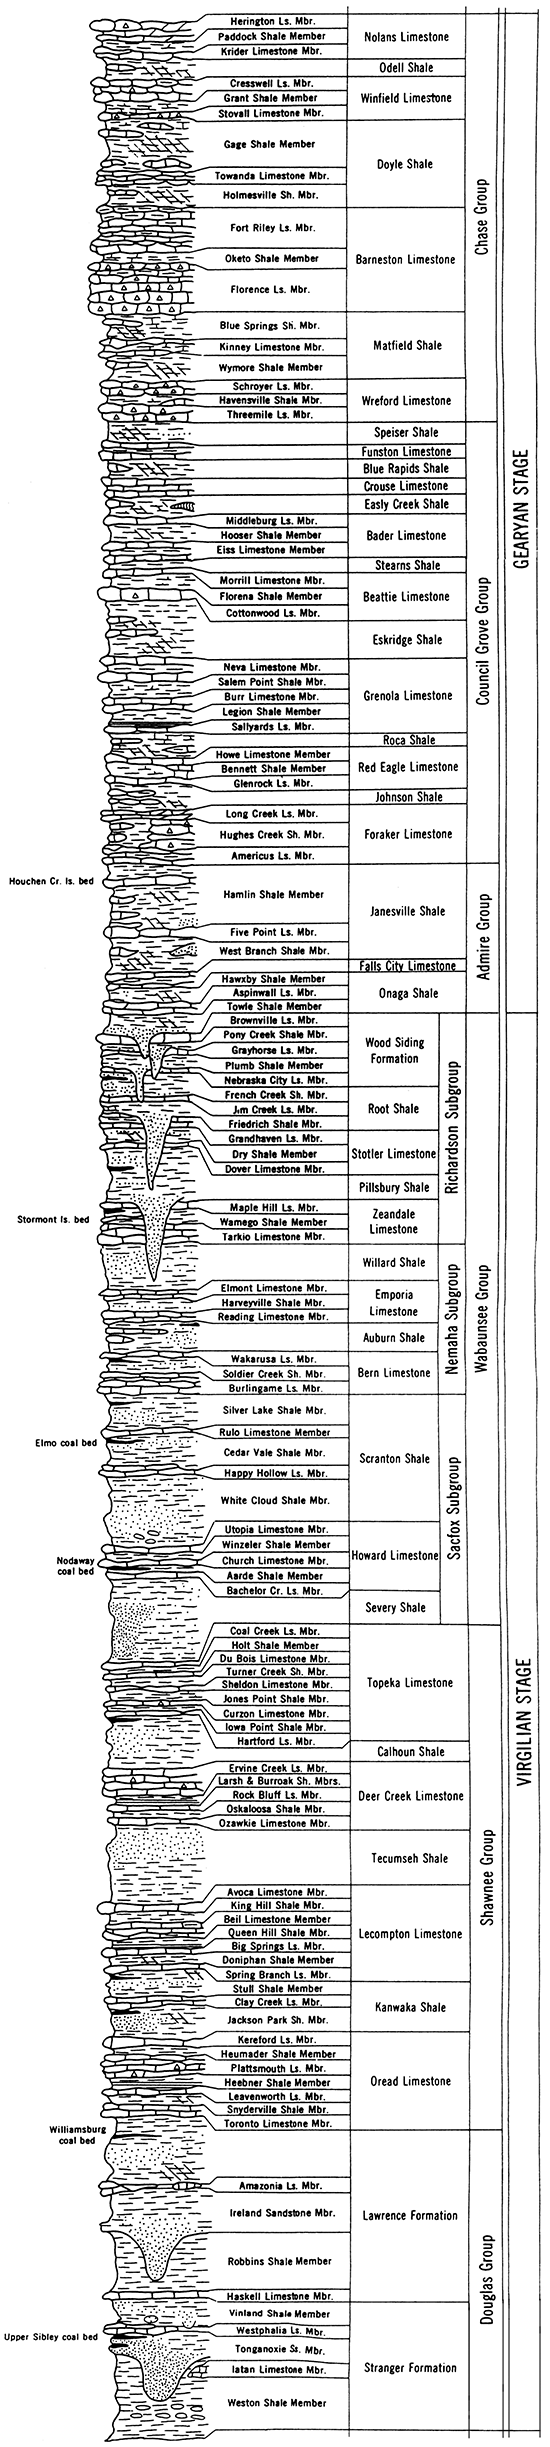 Stratigraphic section of Upper Pennsylvanian and Lower Permian.